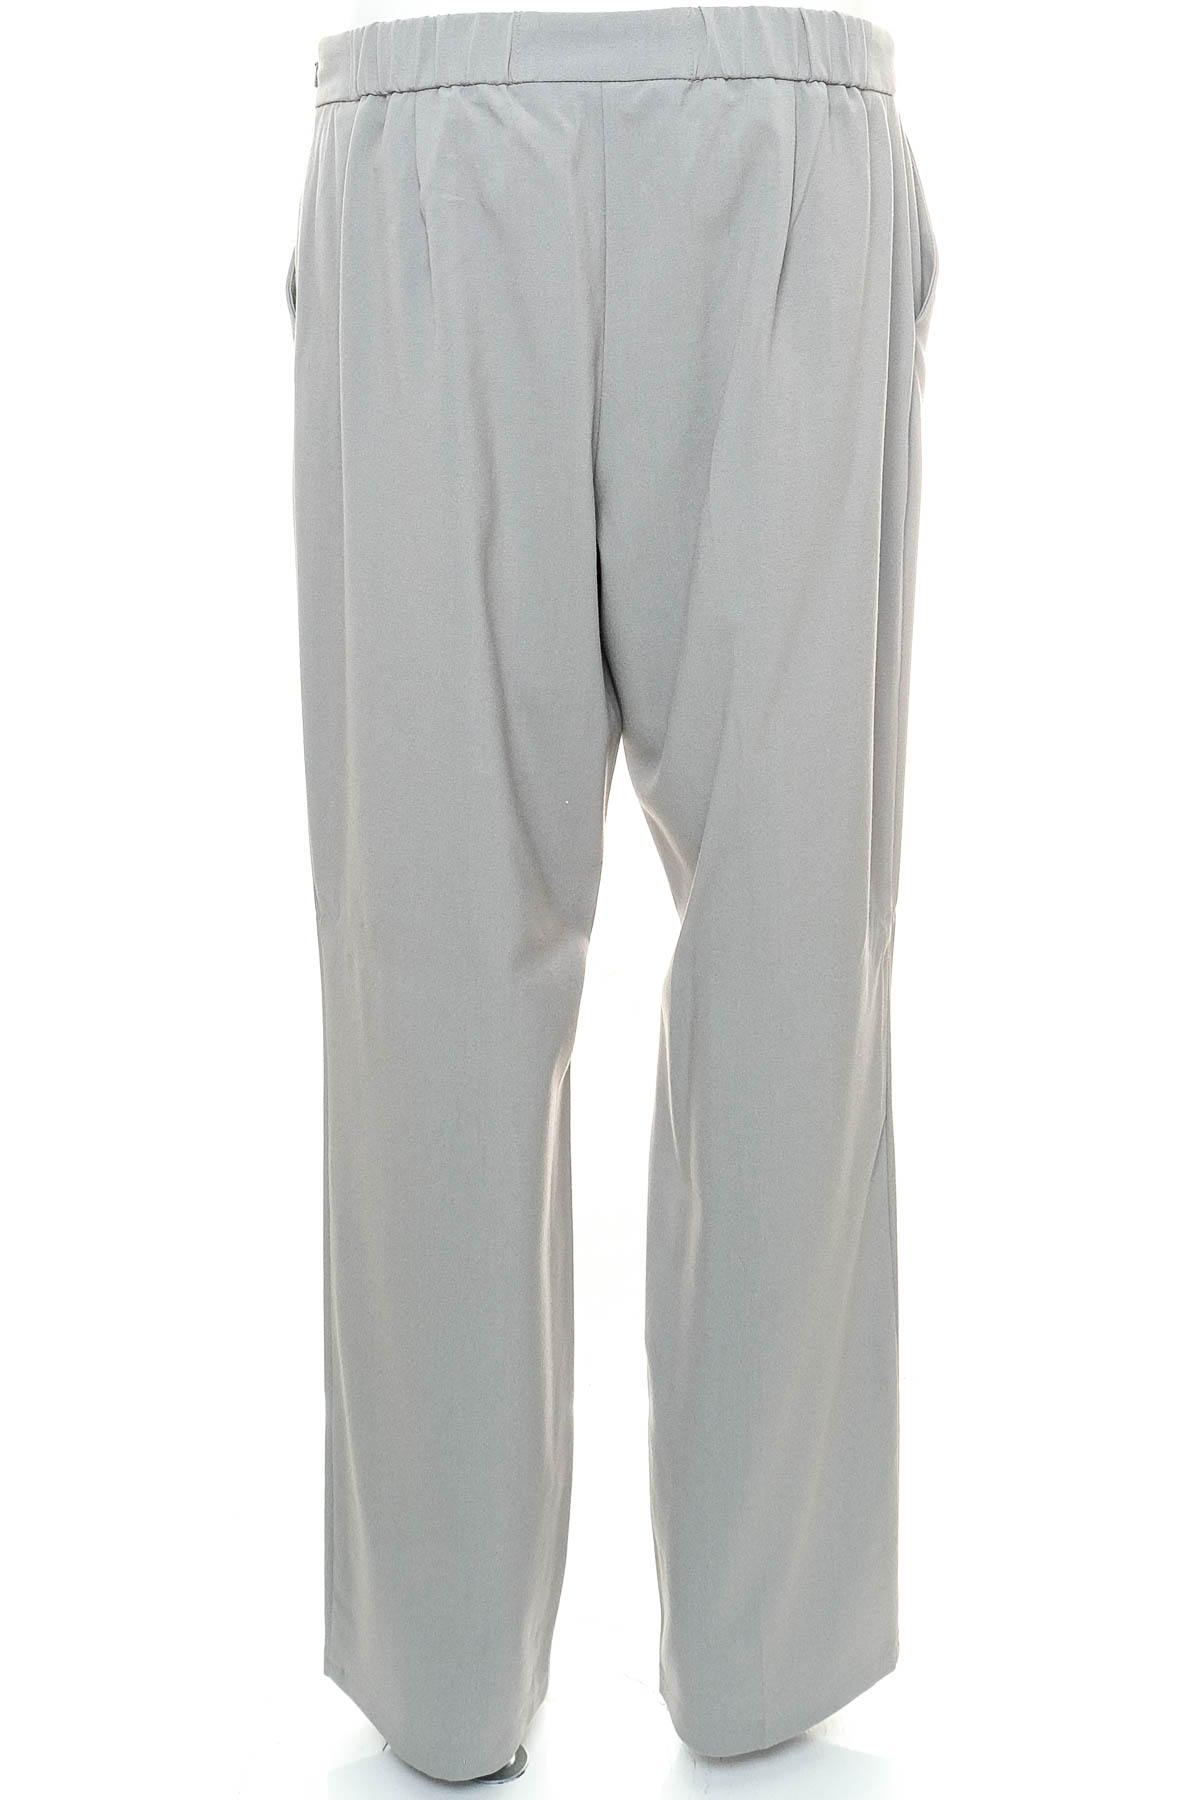 Women's trousers - M&S COLLECTION - 1